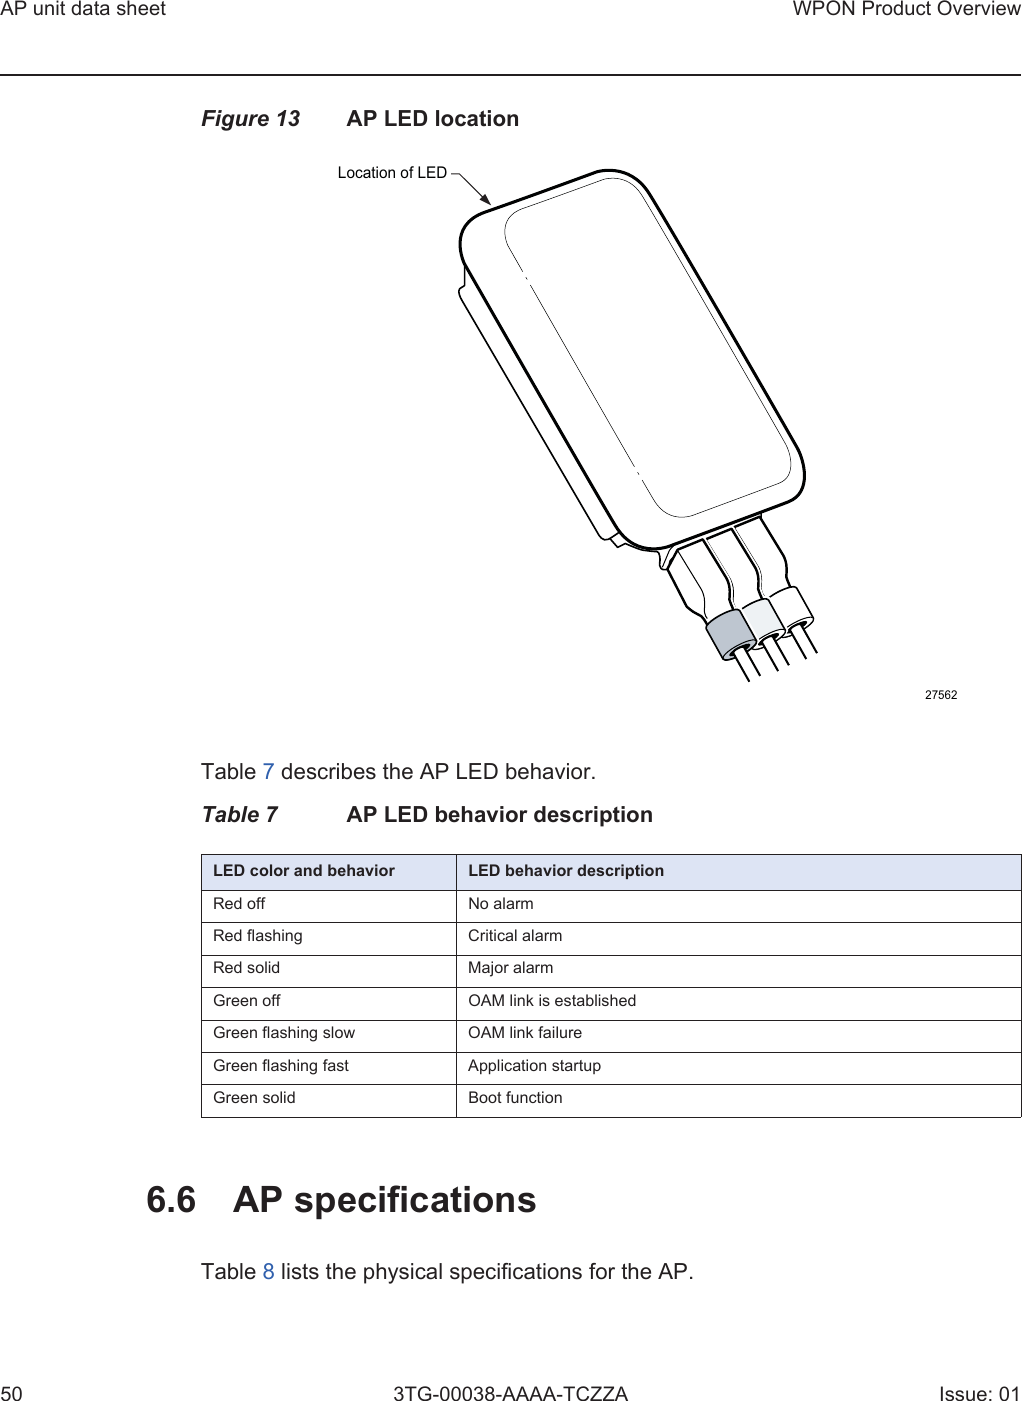 AP unit data sheet50WPON Product Overview3TG-00038-AAAA-TCZZA Issue: 01Figure 13 AP LED locationTable 7 describes the AP LED behavior. Table 7 AP LED behavior description6.6 AP specificationsTable 8 lists the physical specifications for the AP. LED color and behavior LED behavior descriptionRed off No alarm Red flashing Critical alarmRed solid Major alarmGreen off OAM link is established Green flashing slow OAM link failureGreen flashing fast Application startup Green solid Boot function27562Location of LED